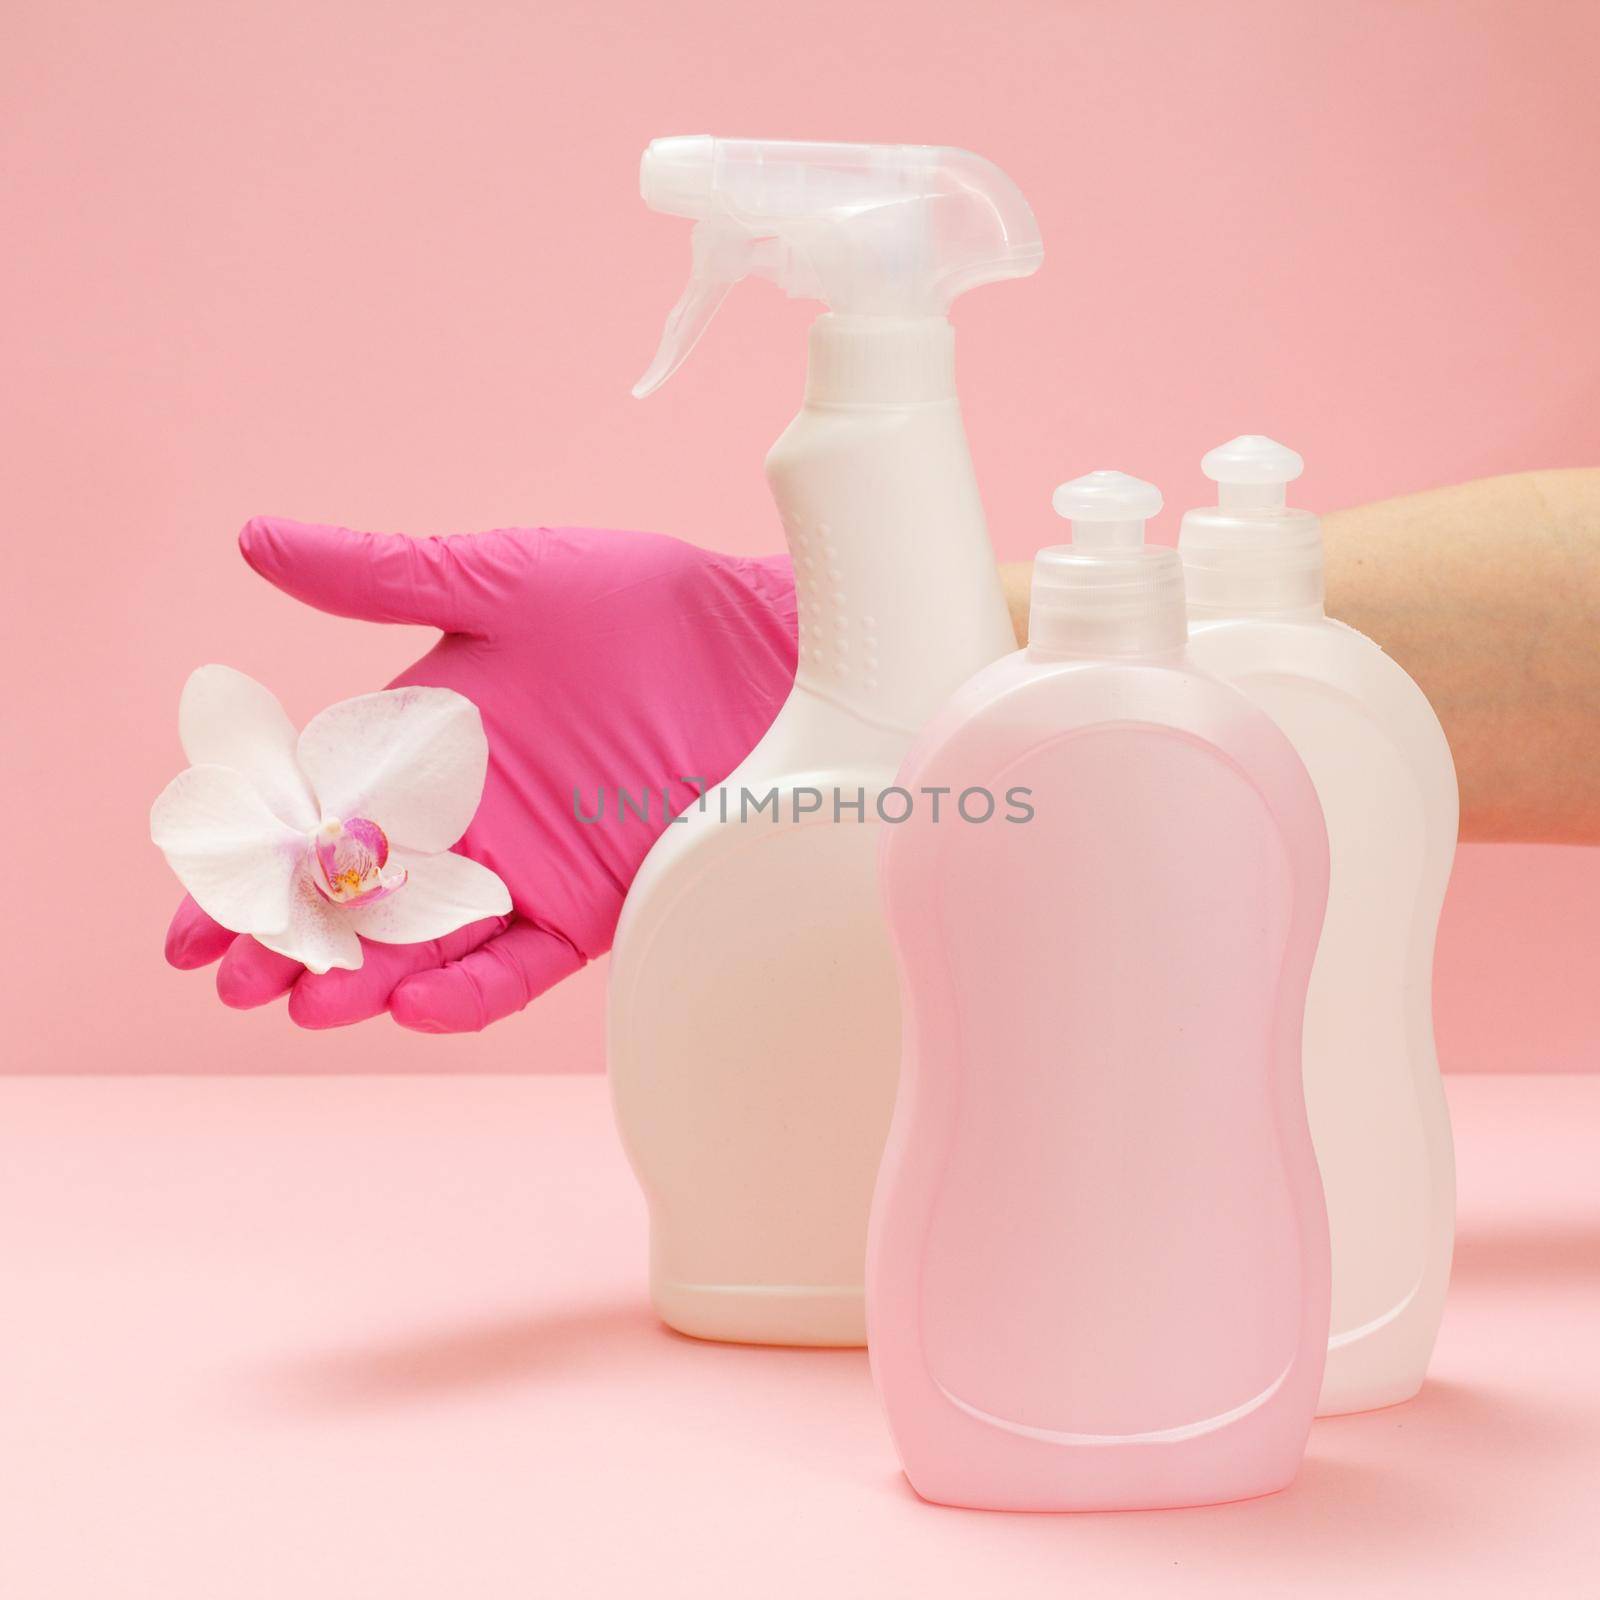 Bottles of washing liquid and a hand with a orchid flower on a pink background. by mvg6894